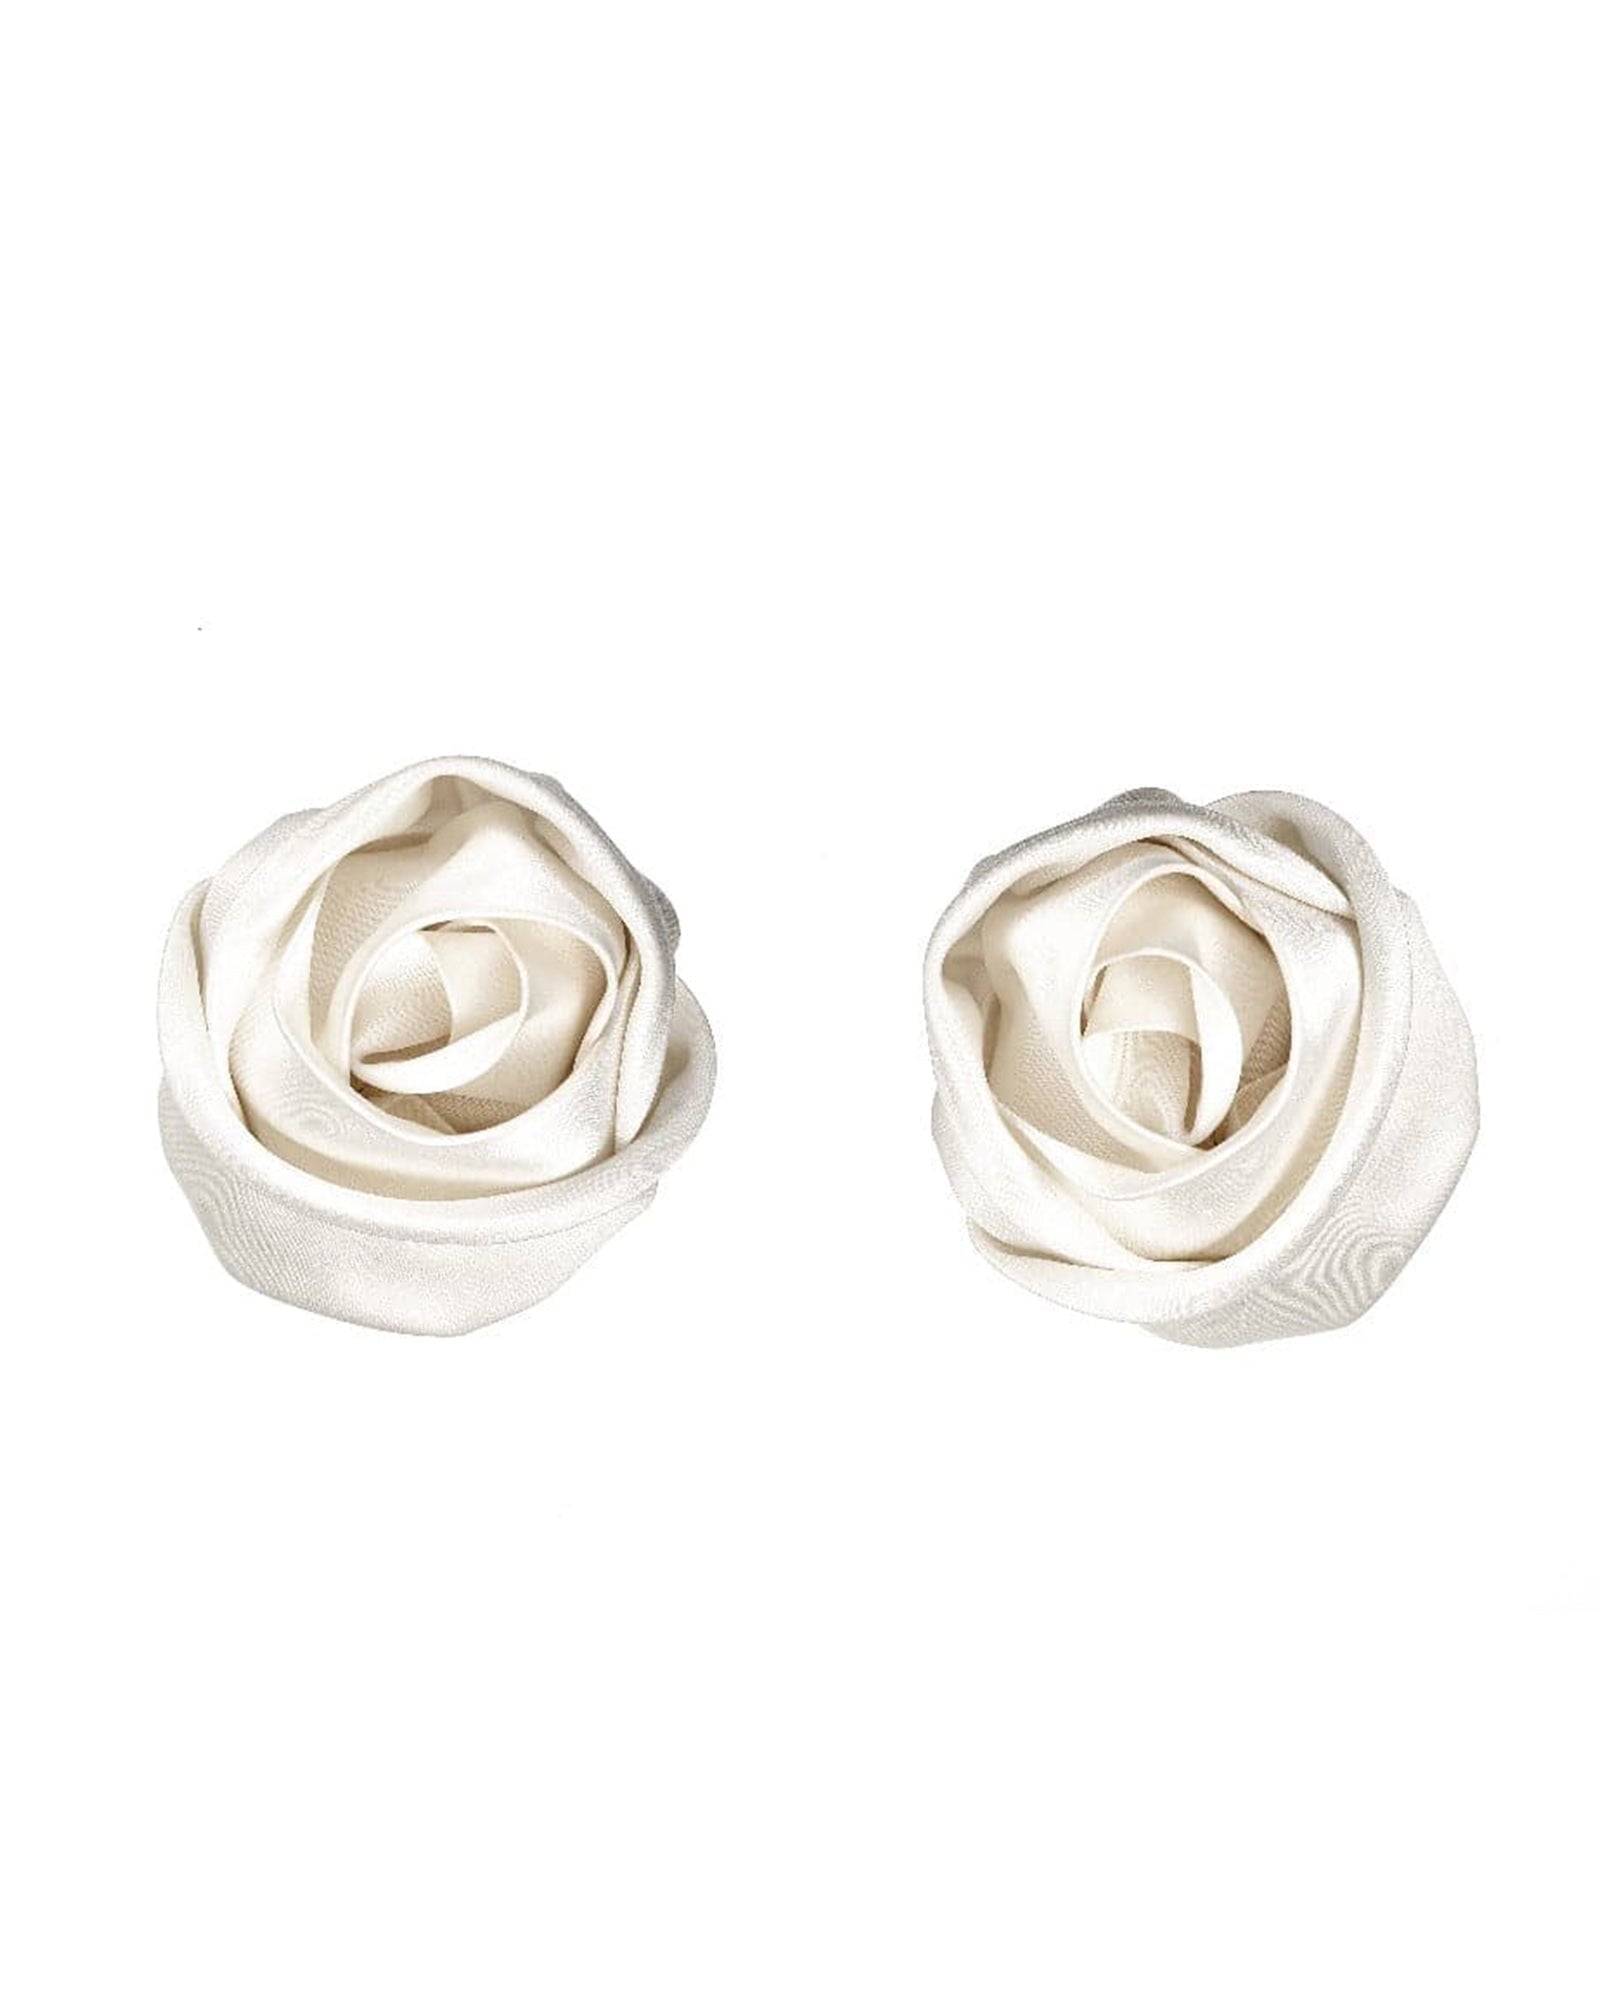 Ivory Ruched Rose Shoe Clips Shoe Clip Duchess Satin Rose Shoe Clips  image